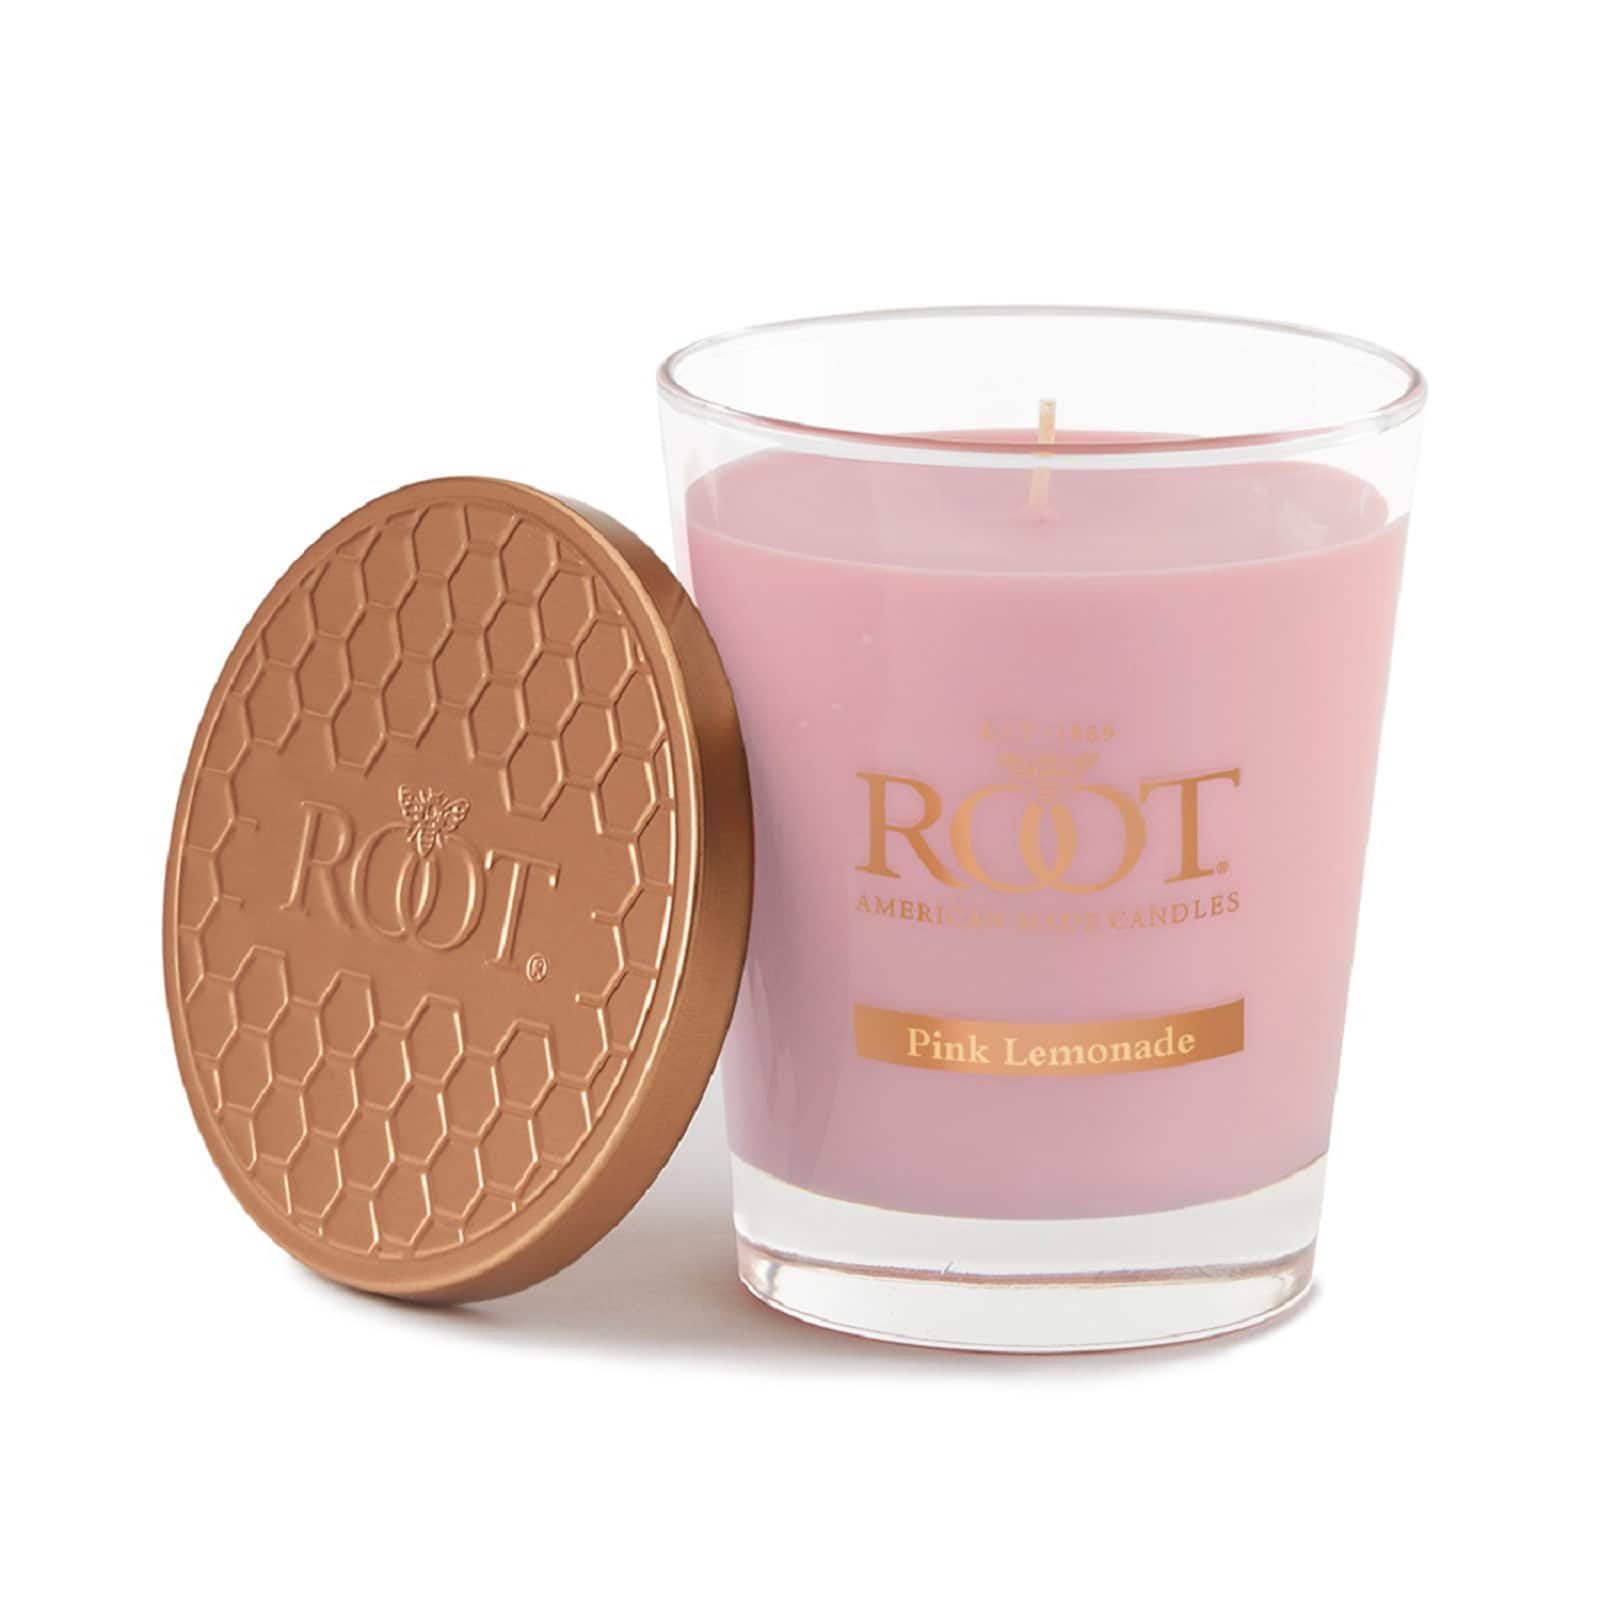 Root Candles 10.5oz. Large Scented Honeycomb Veriglass Jar Candle